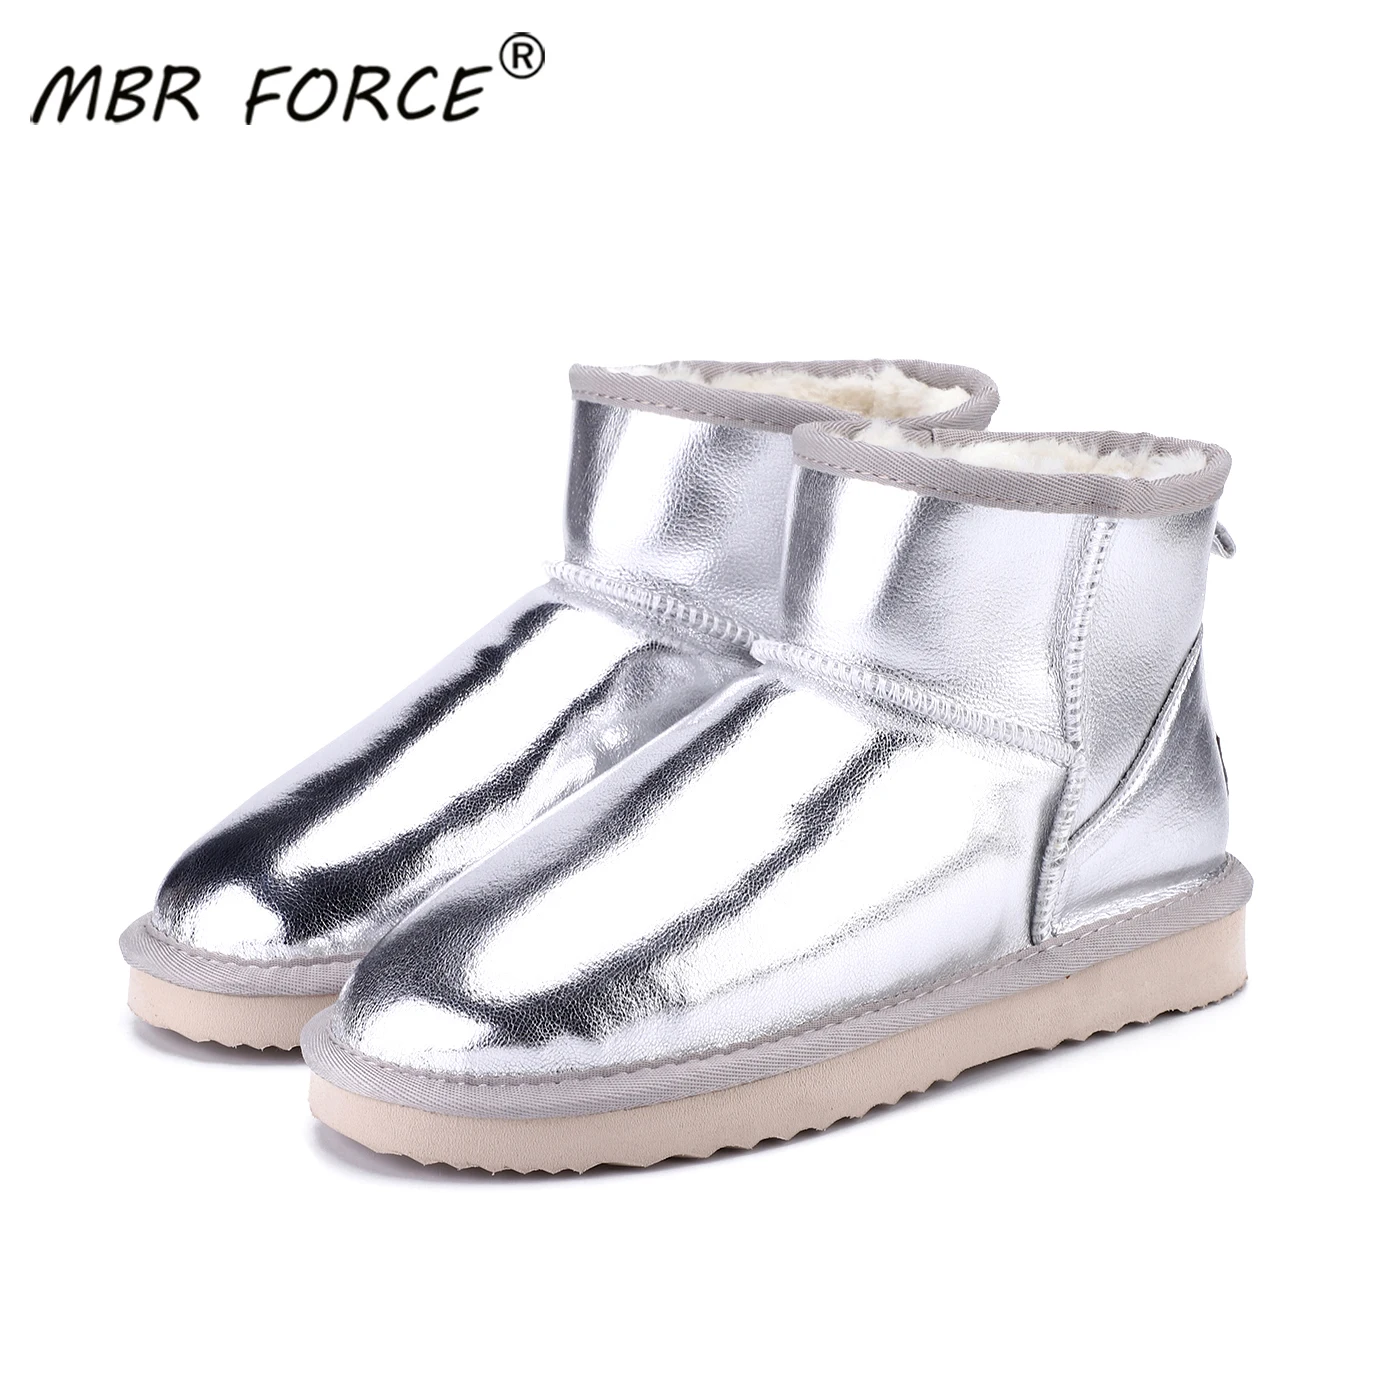 

MBR FORCE new Australia Women Snow Boots 100% Genuine Cowhide Leather Ankle Boots Warm Winter Boots Woman shoes large size 34-43